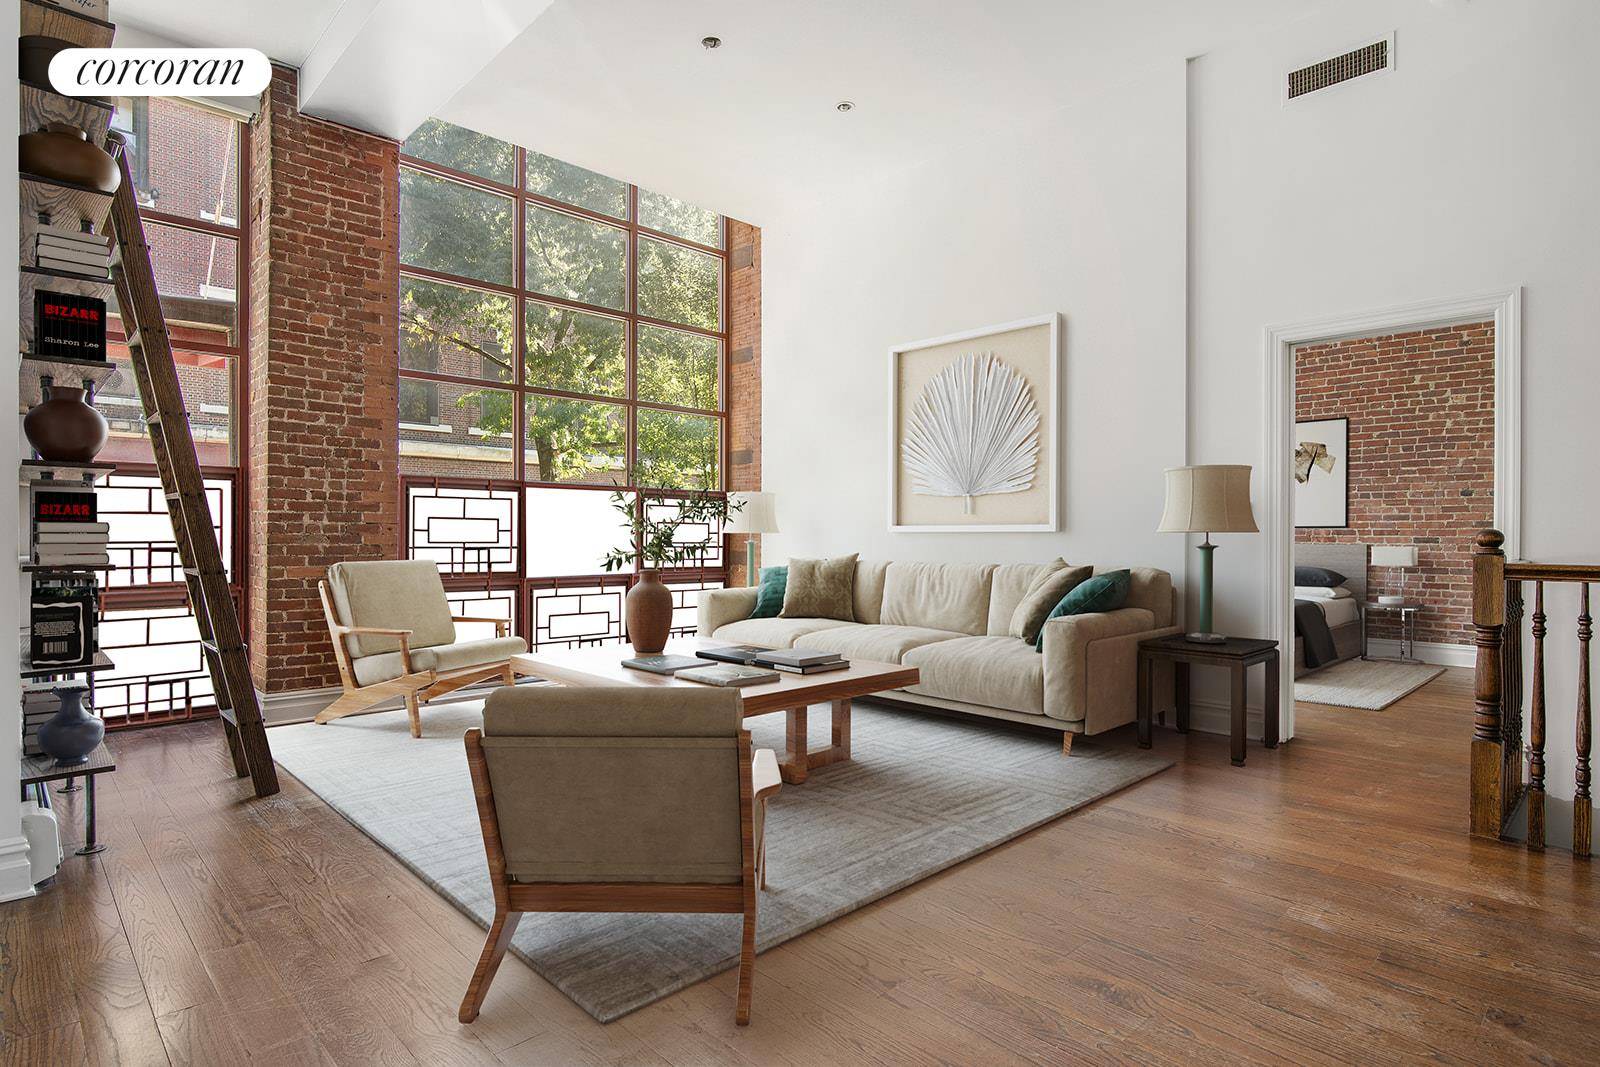 458 WEST 146TH STREET APARTMENT 1N PRIME HAMILTON HEIGHTS AMAZING LOFT DUPLEX 14' CEILINGS EIGHT CLOSETS OPEN KITCHEN This is a tremendous opportunity to own a stunning 2, 235 SF ...